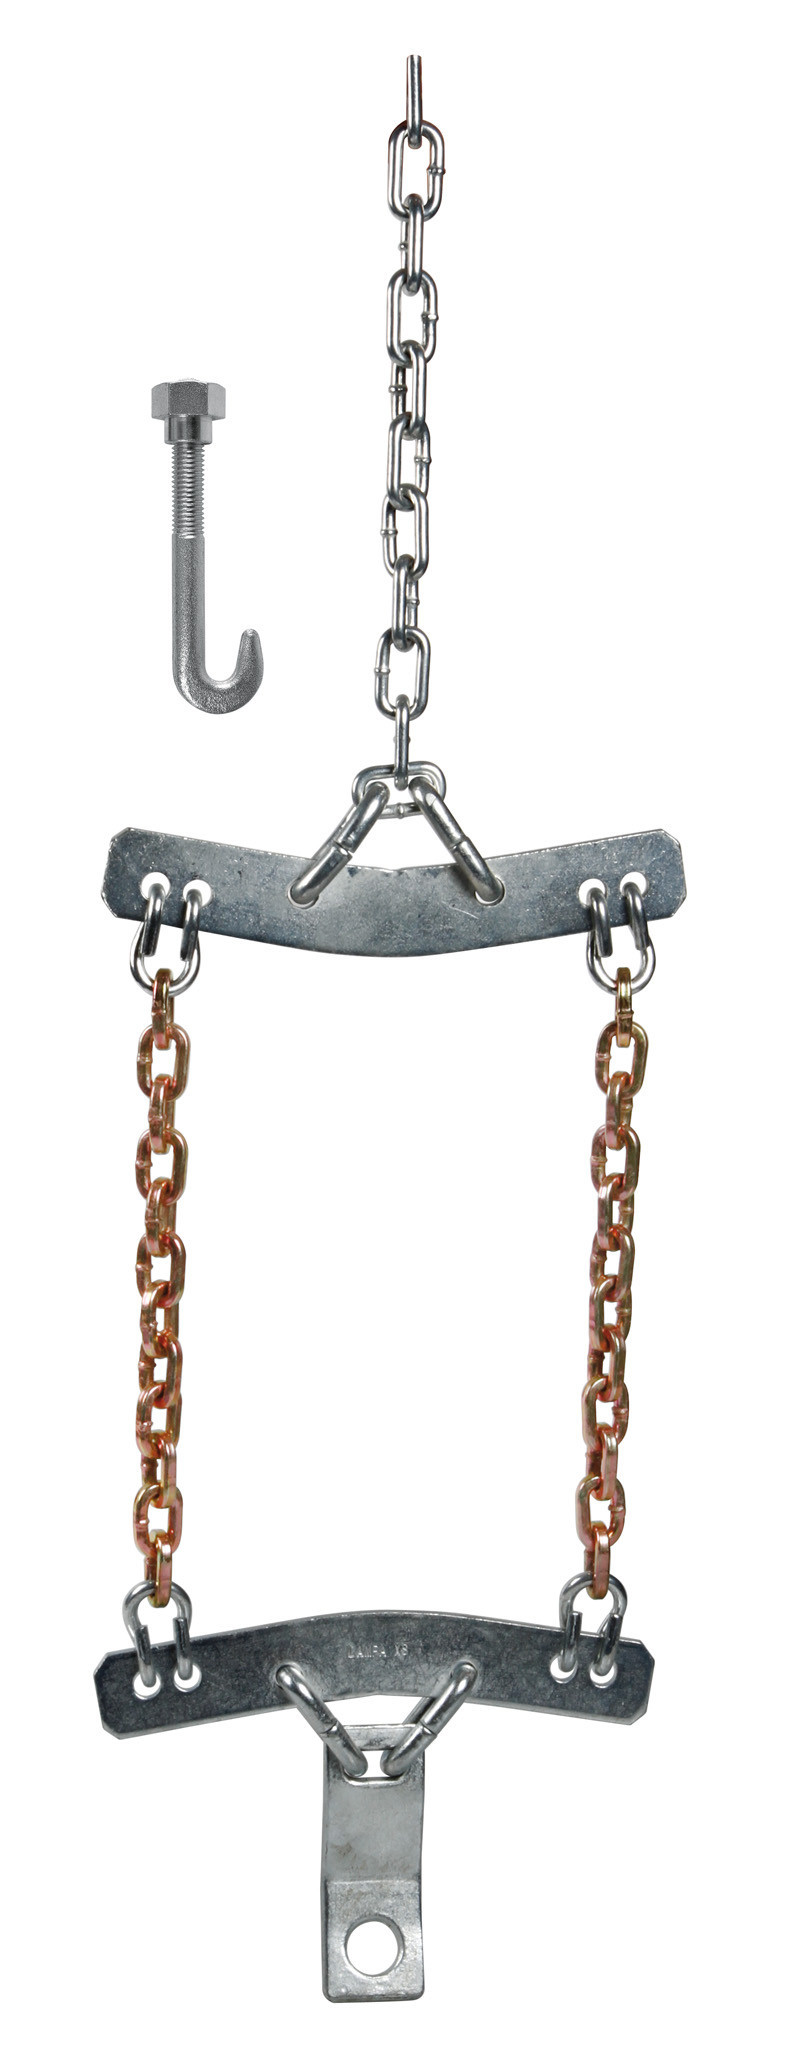 Track sector chains for trucks - S-2 thumb